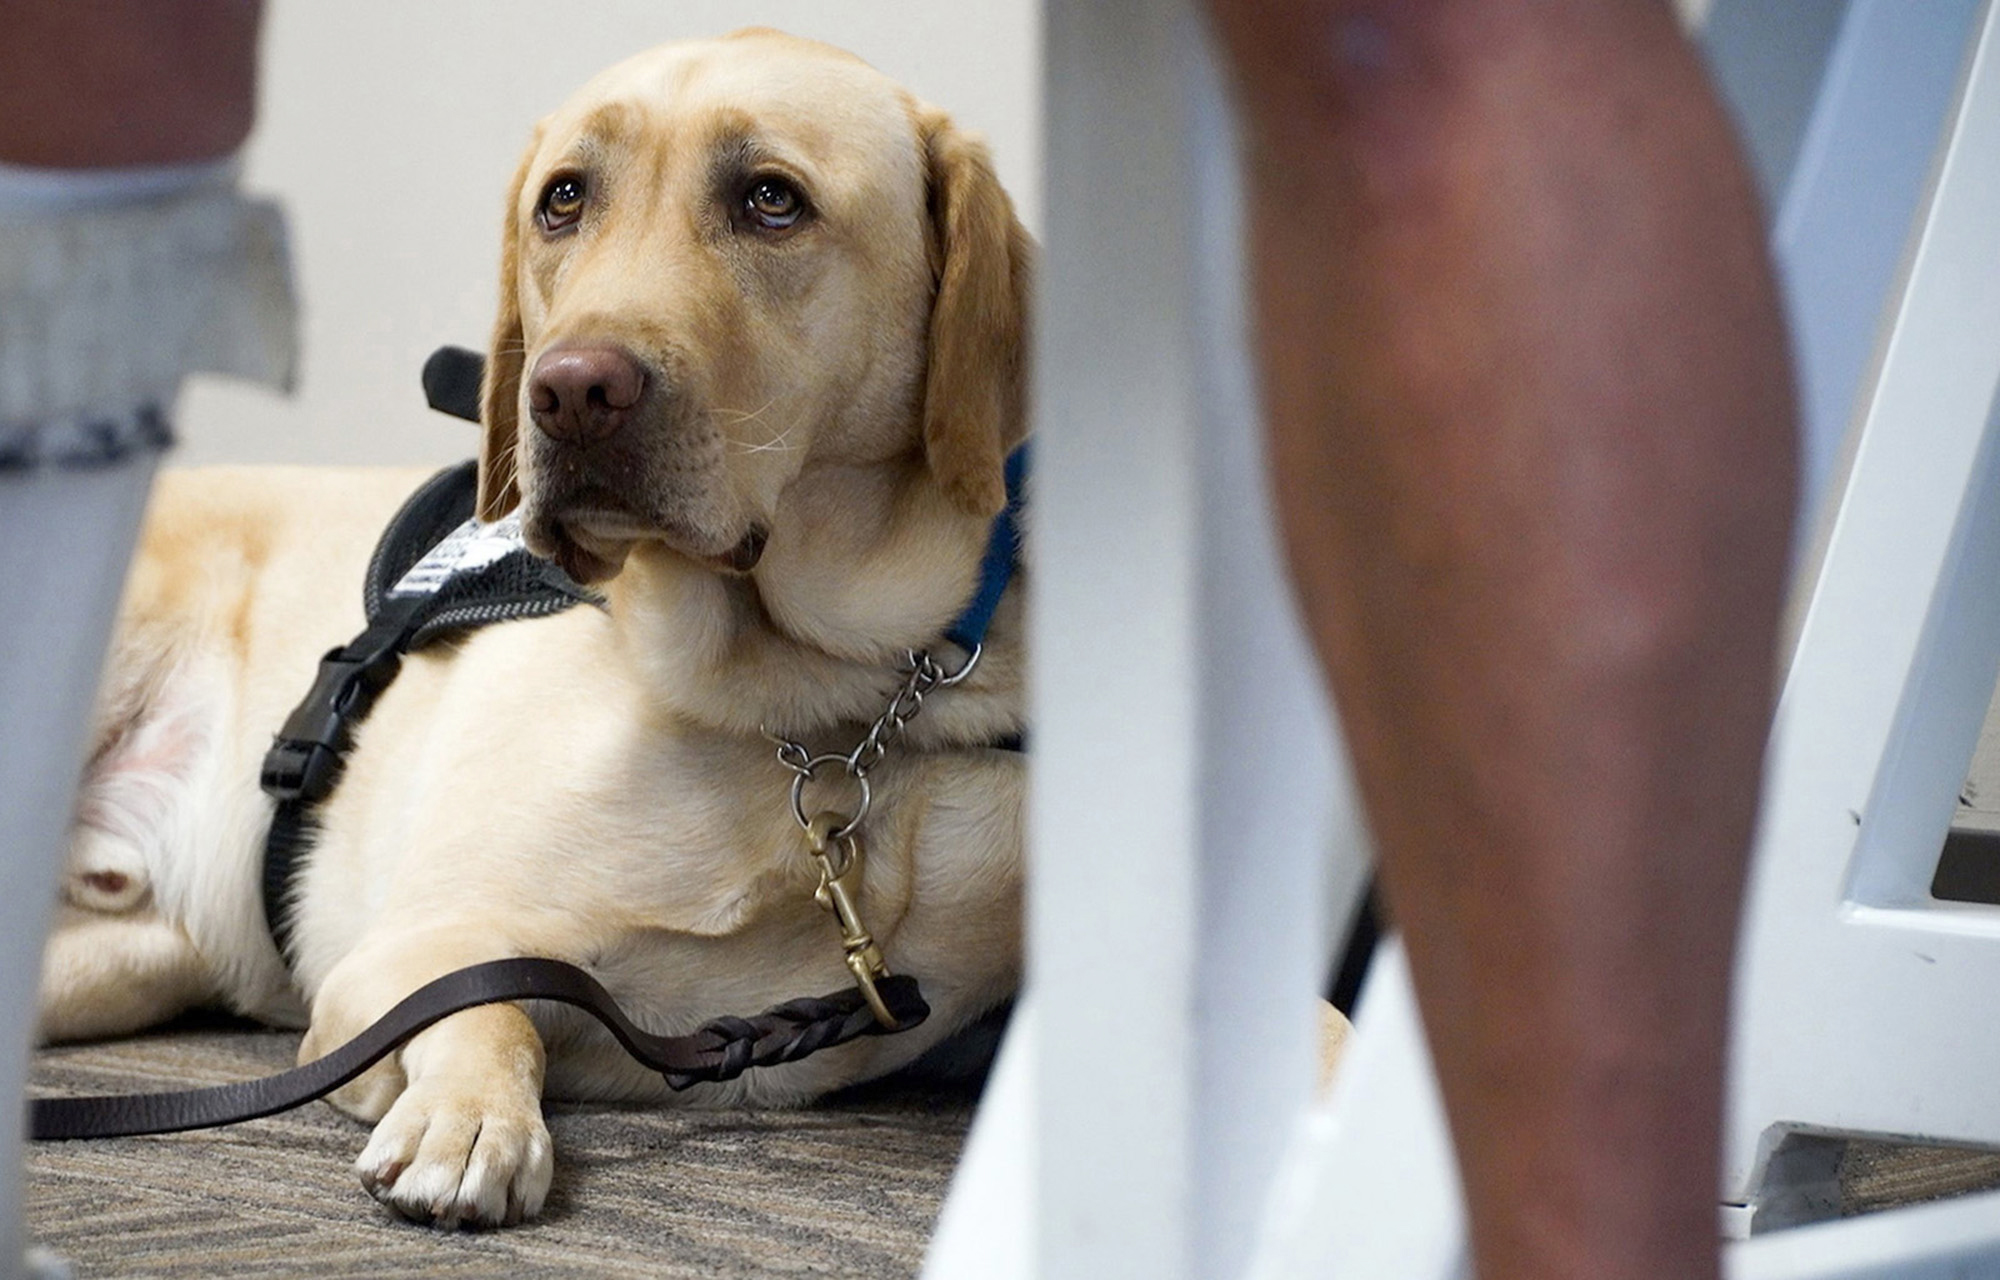 PHOTO: An emotional support animal waits with their owner.